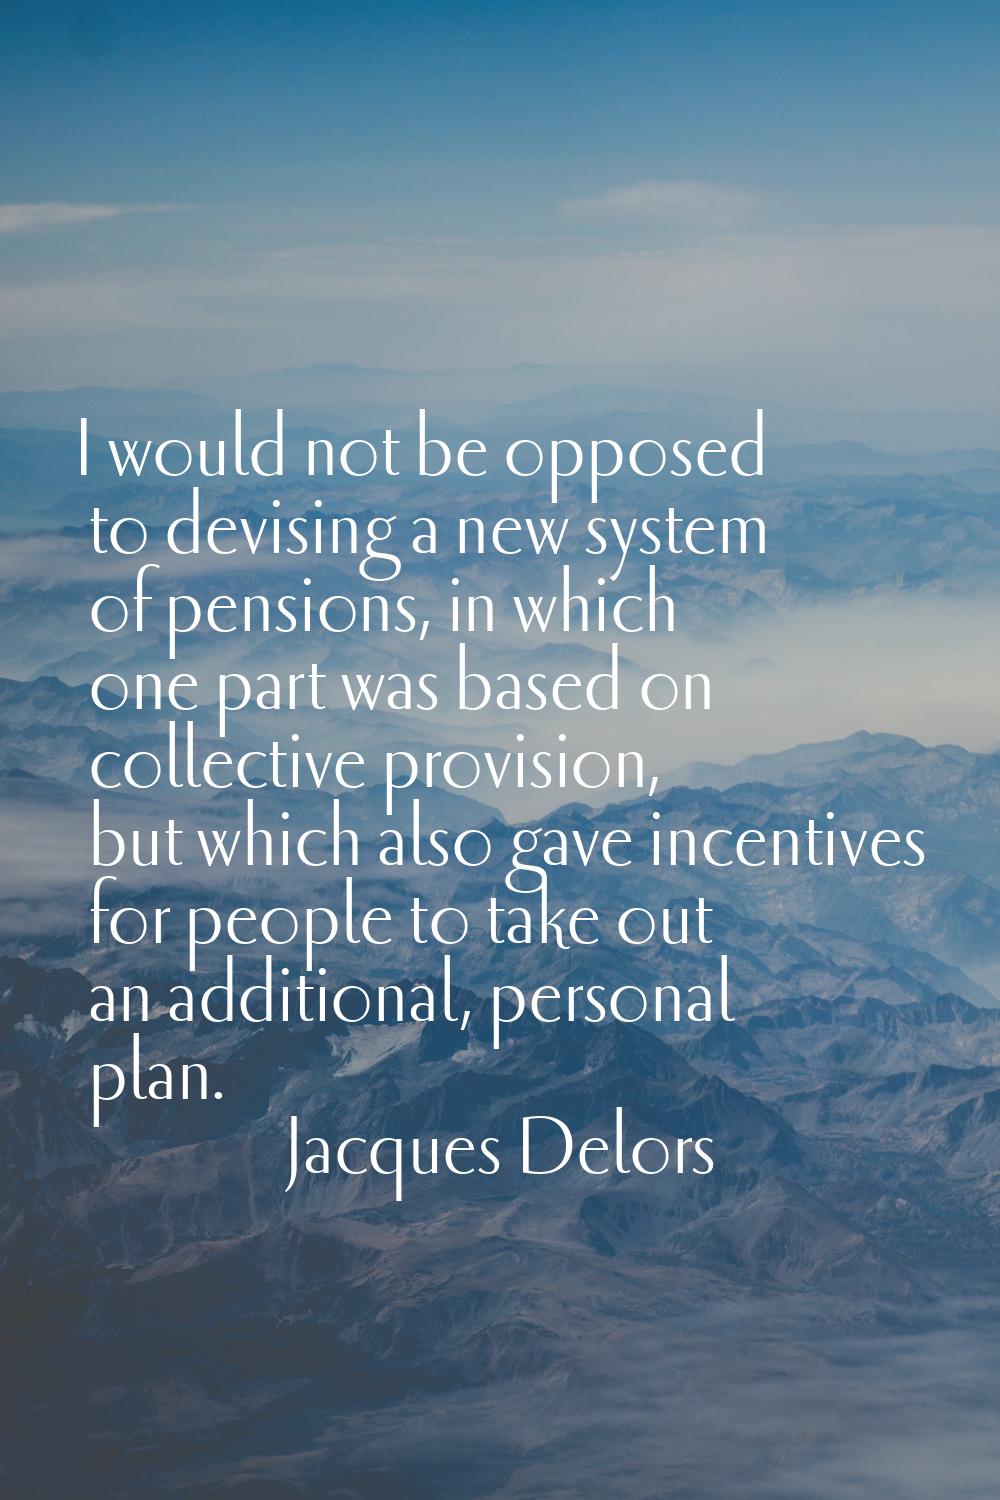 I would not be opposed to devising a new system of pensions, in which one part was based on collect